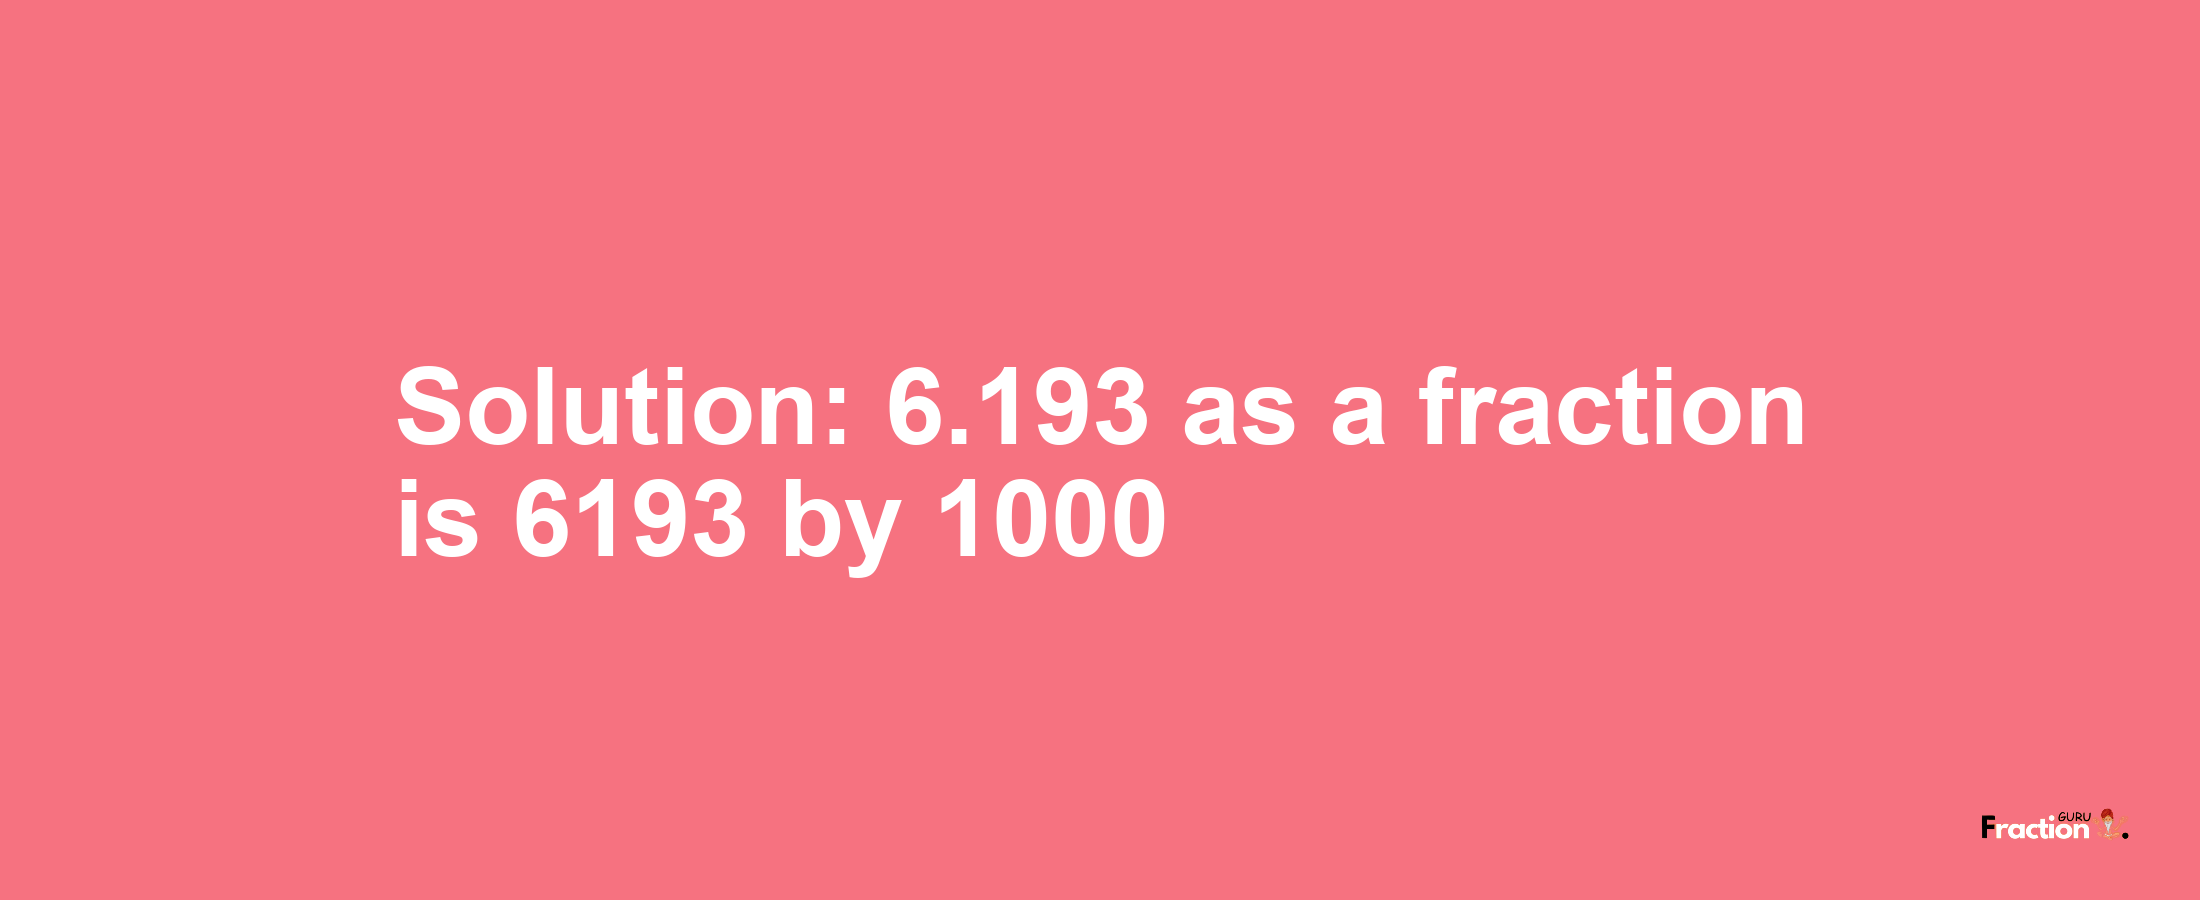 Solution:6.193 as a fraction is 6193/1000